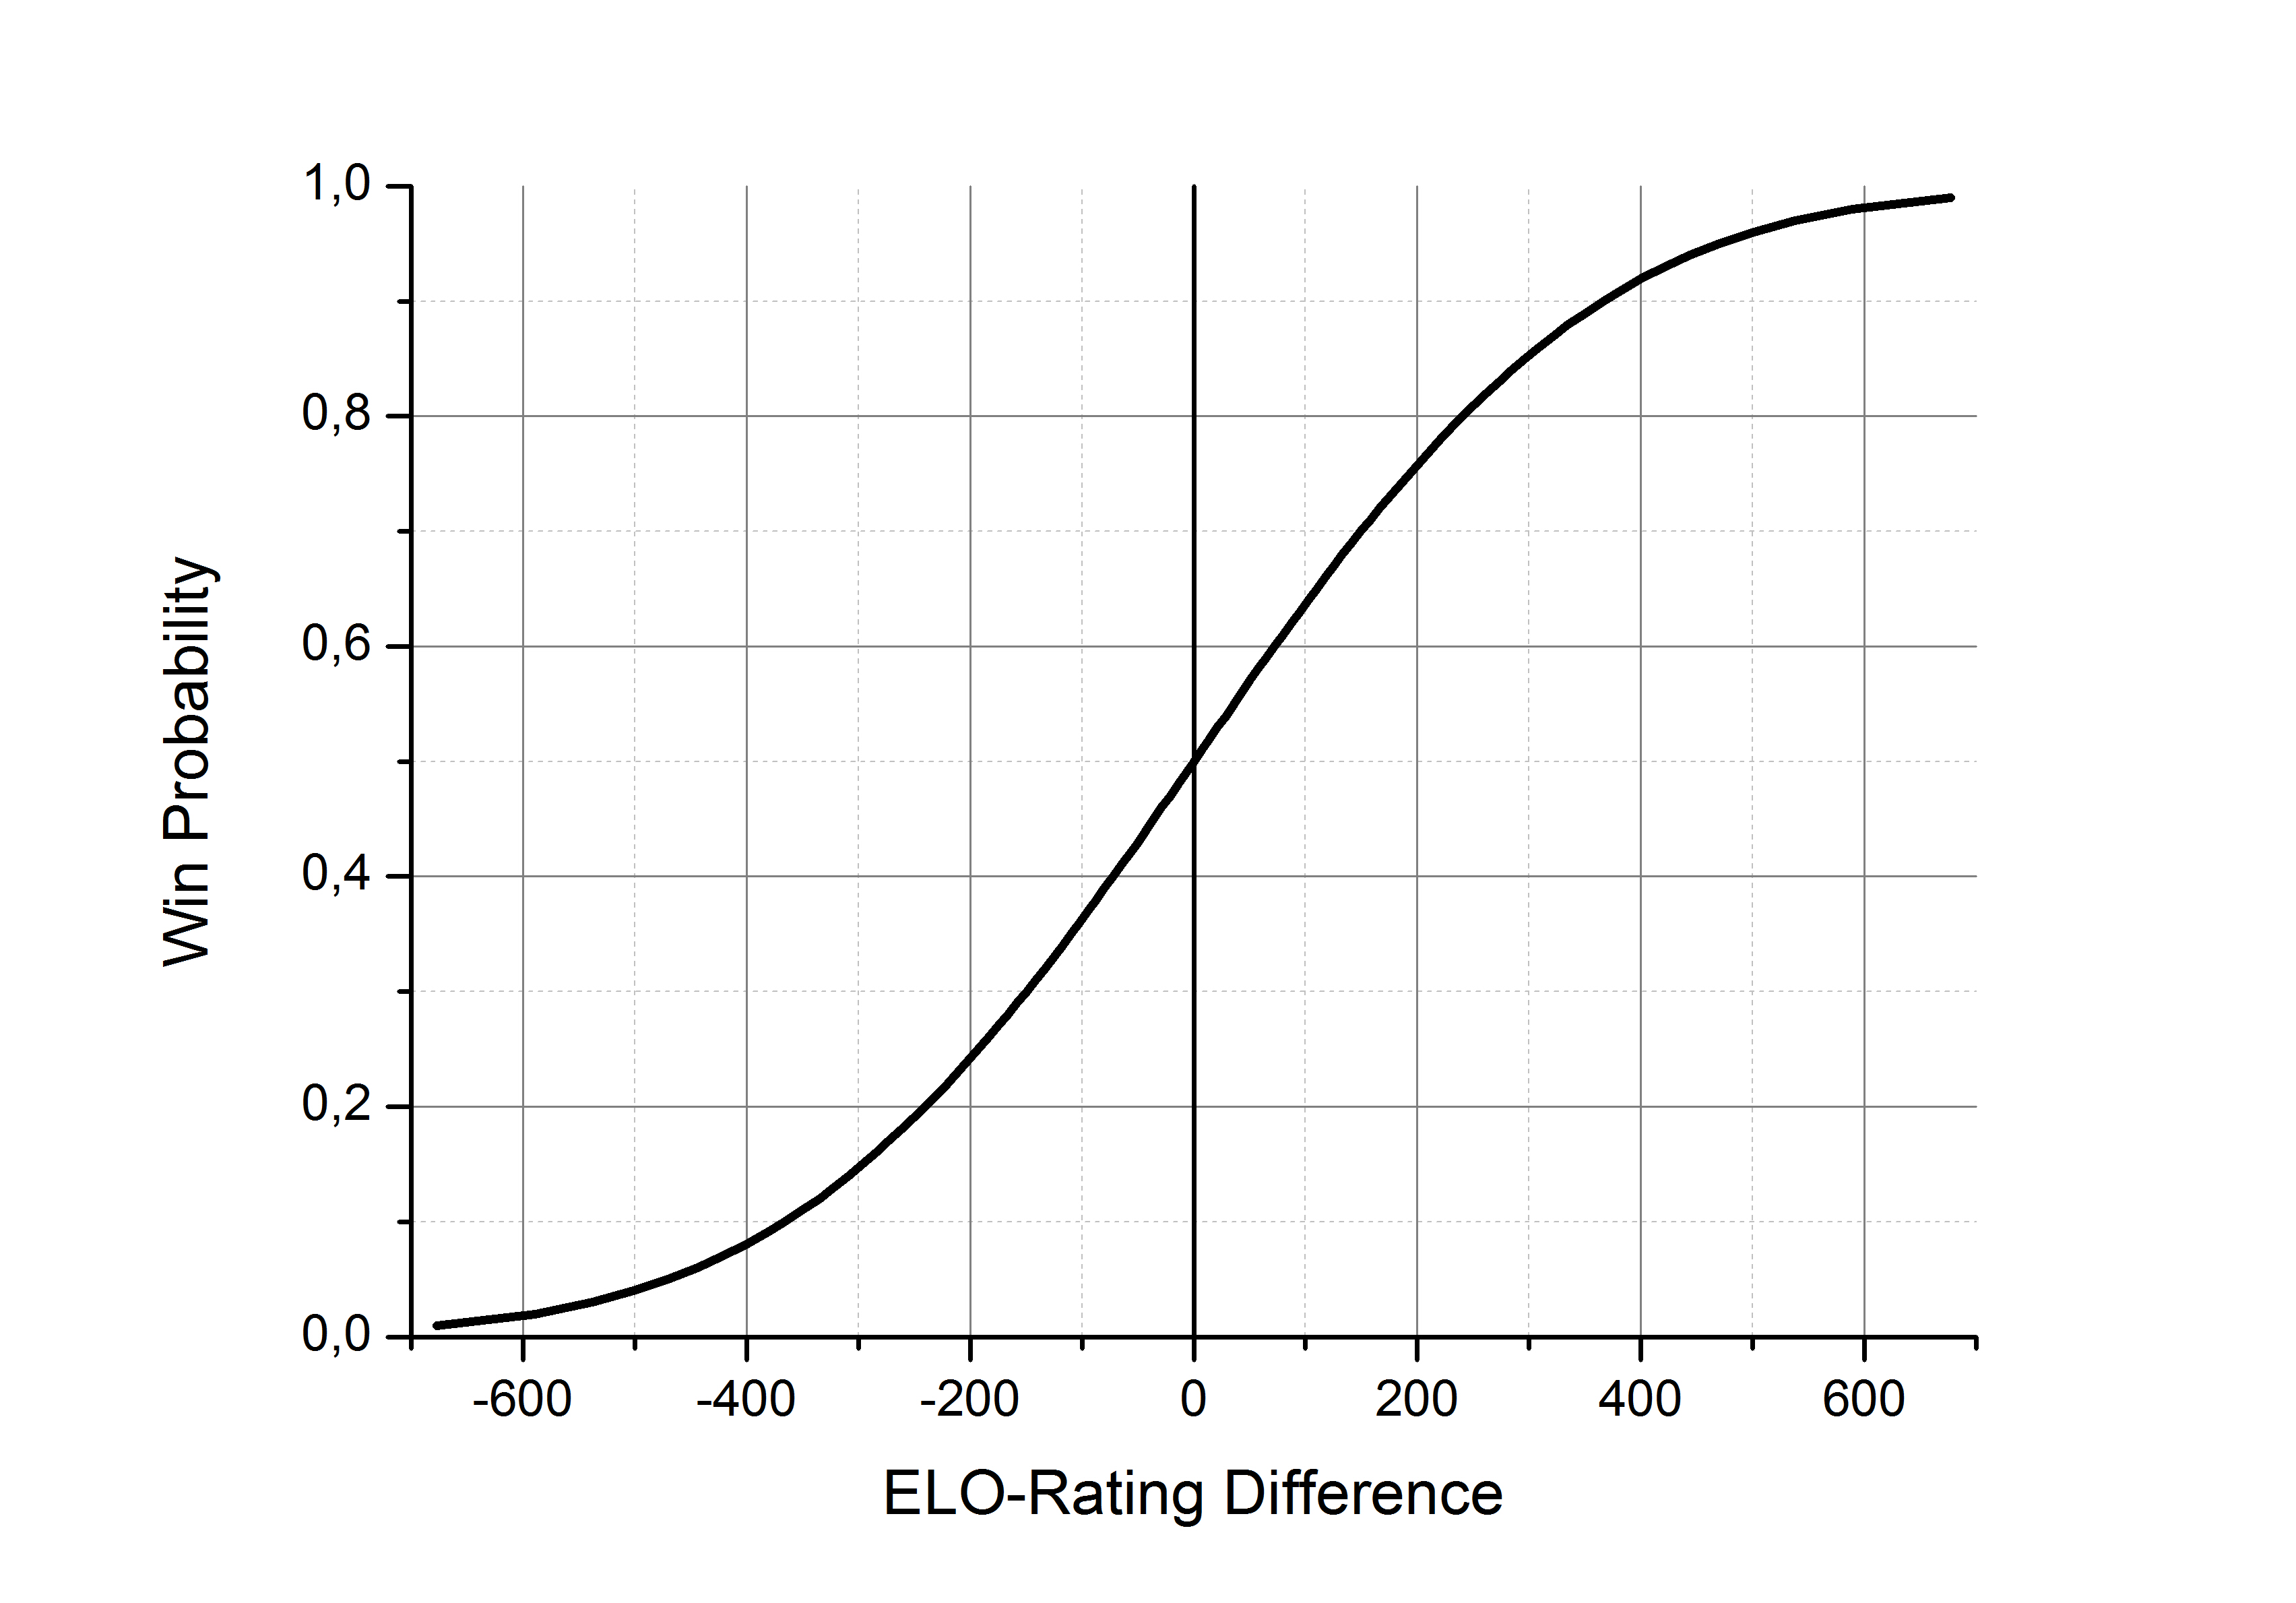 The Elo system